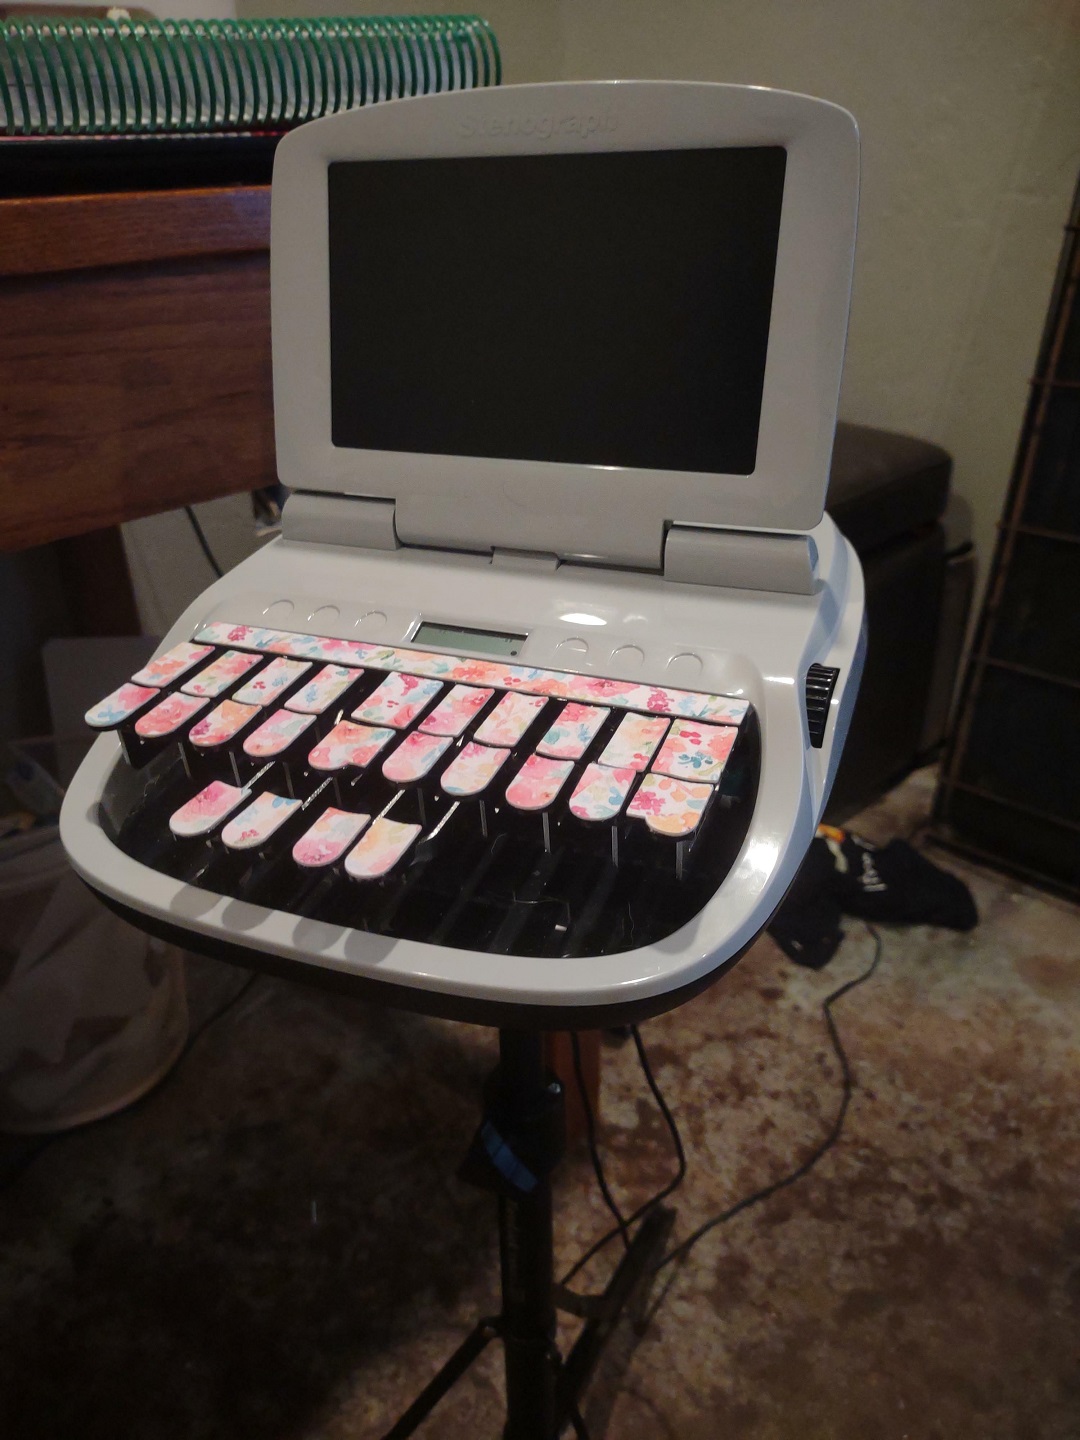 This Is A Steno Machine, Used For Recording Words Verbatim At Speeds Over 225 Words Per Minute. Used In Court Rooms And Legal Depositions